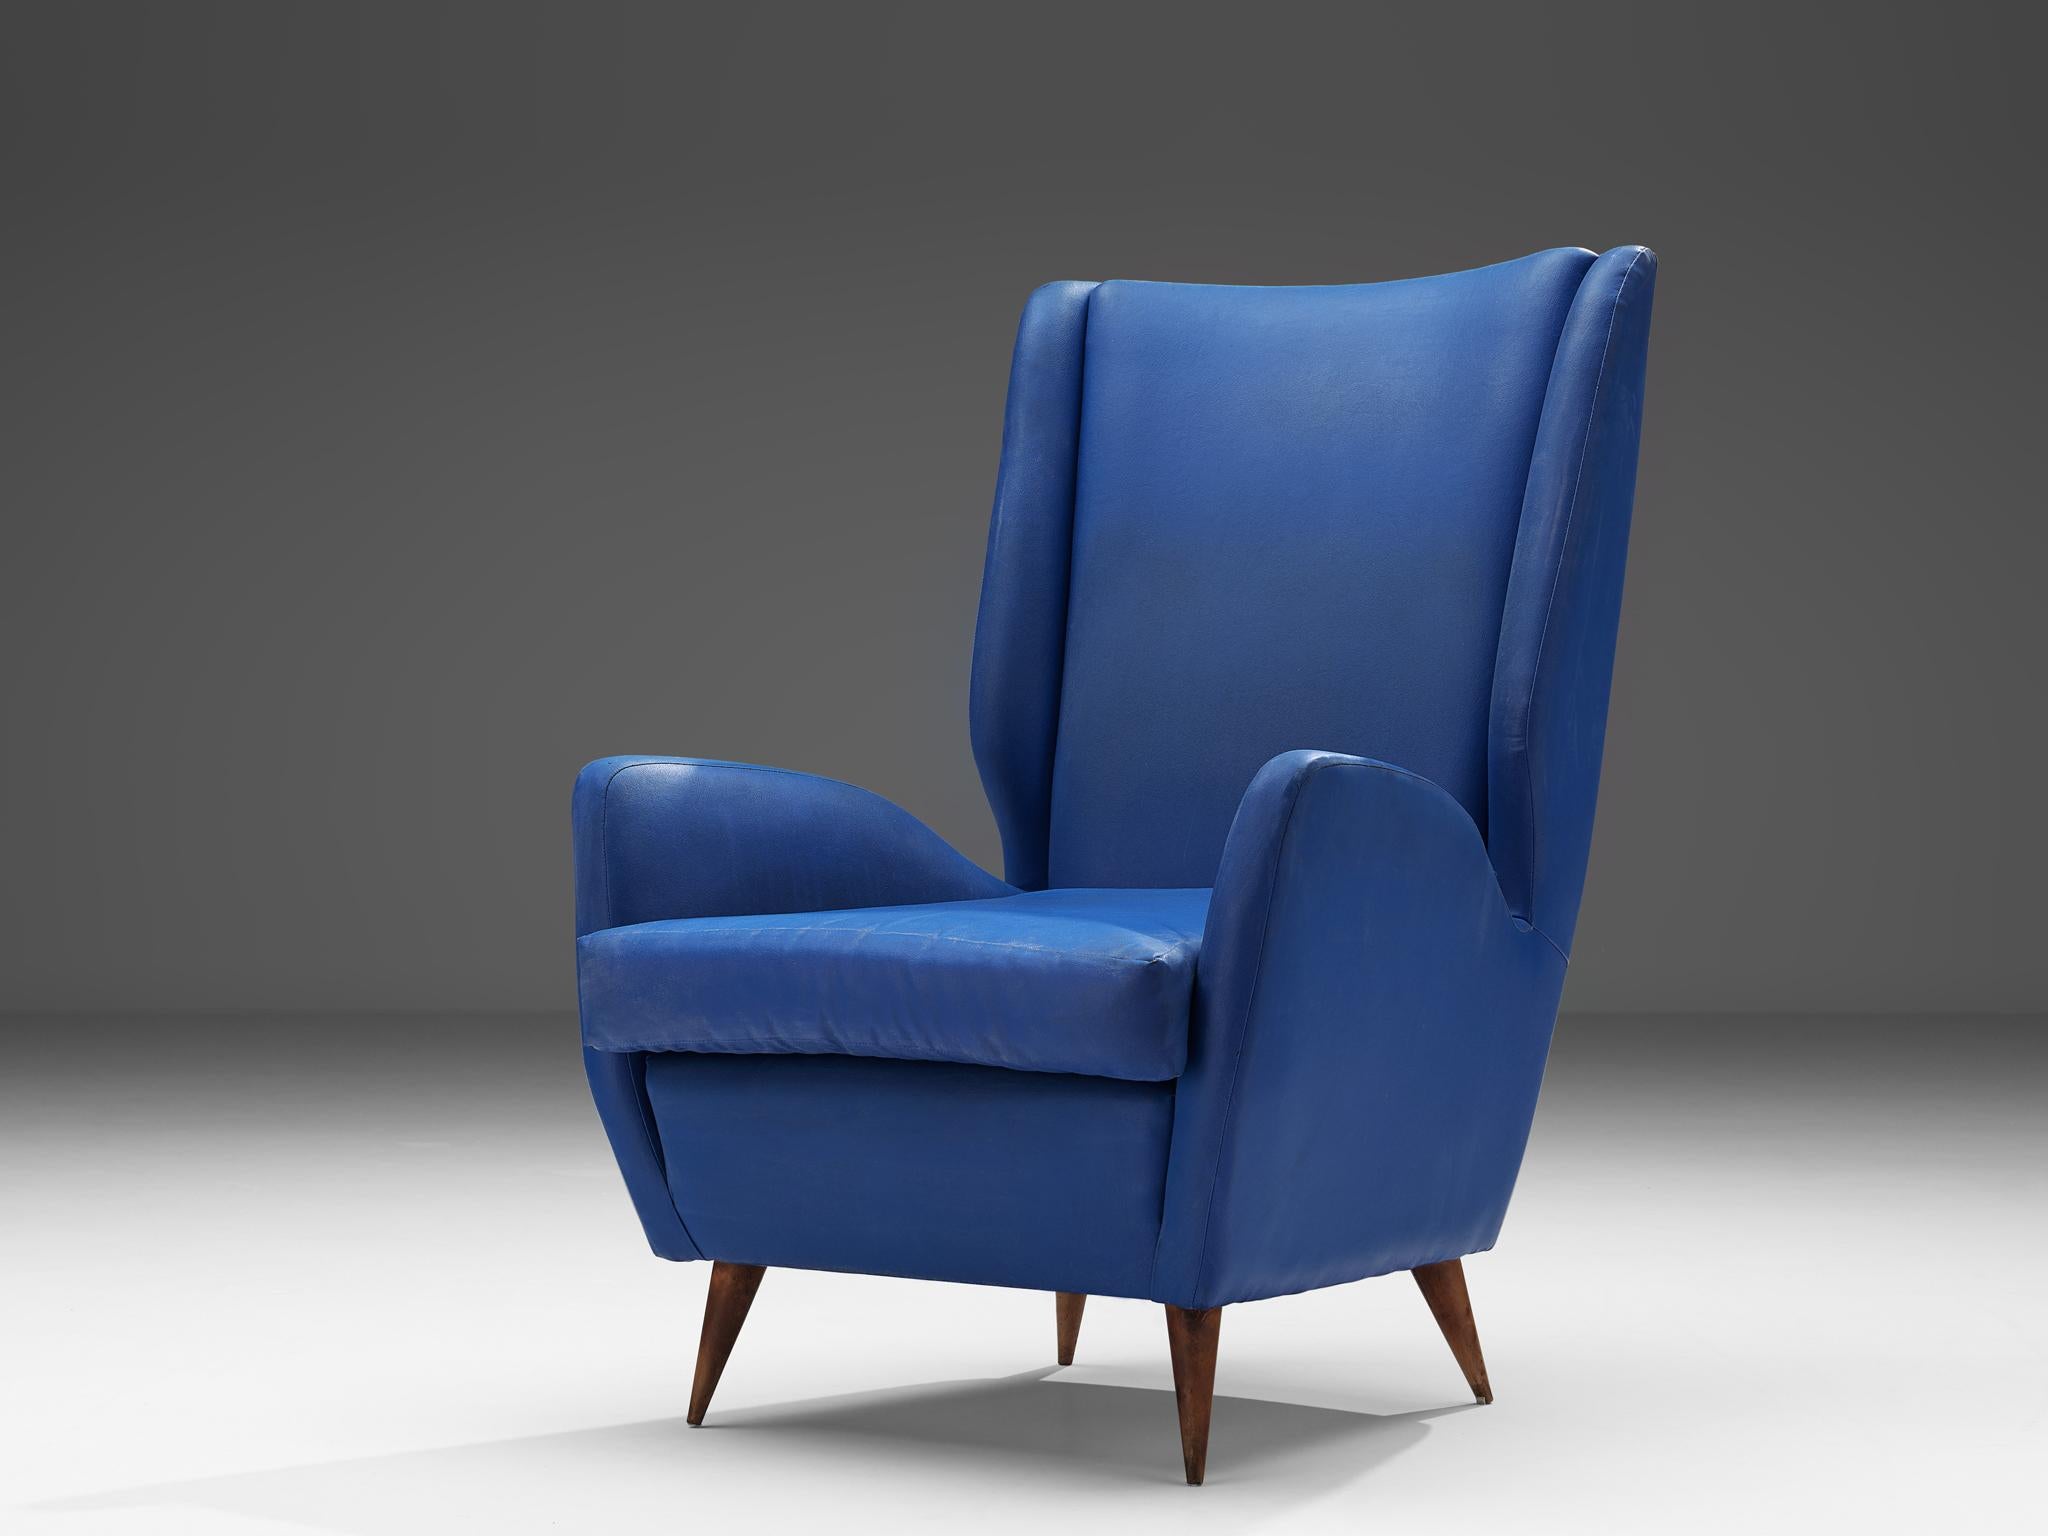 Italian high back lounge chair, wood, leather, Italy, 1950s

This elegant shaped lounge chair of Italian origin comes with a vibrant blue leatherette upholstery making it suitable as standout in your hallway or in the heart of your interior. The